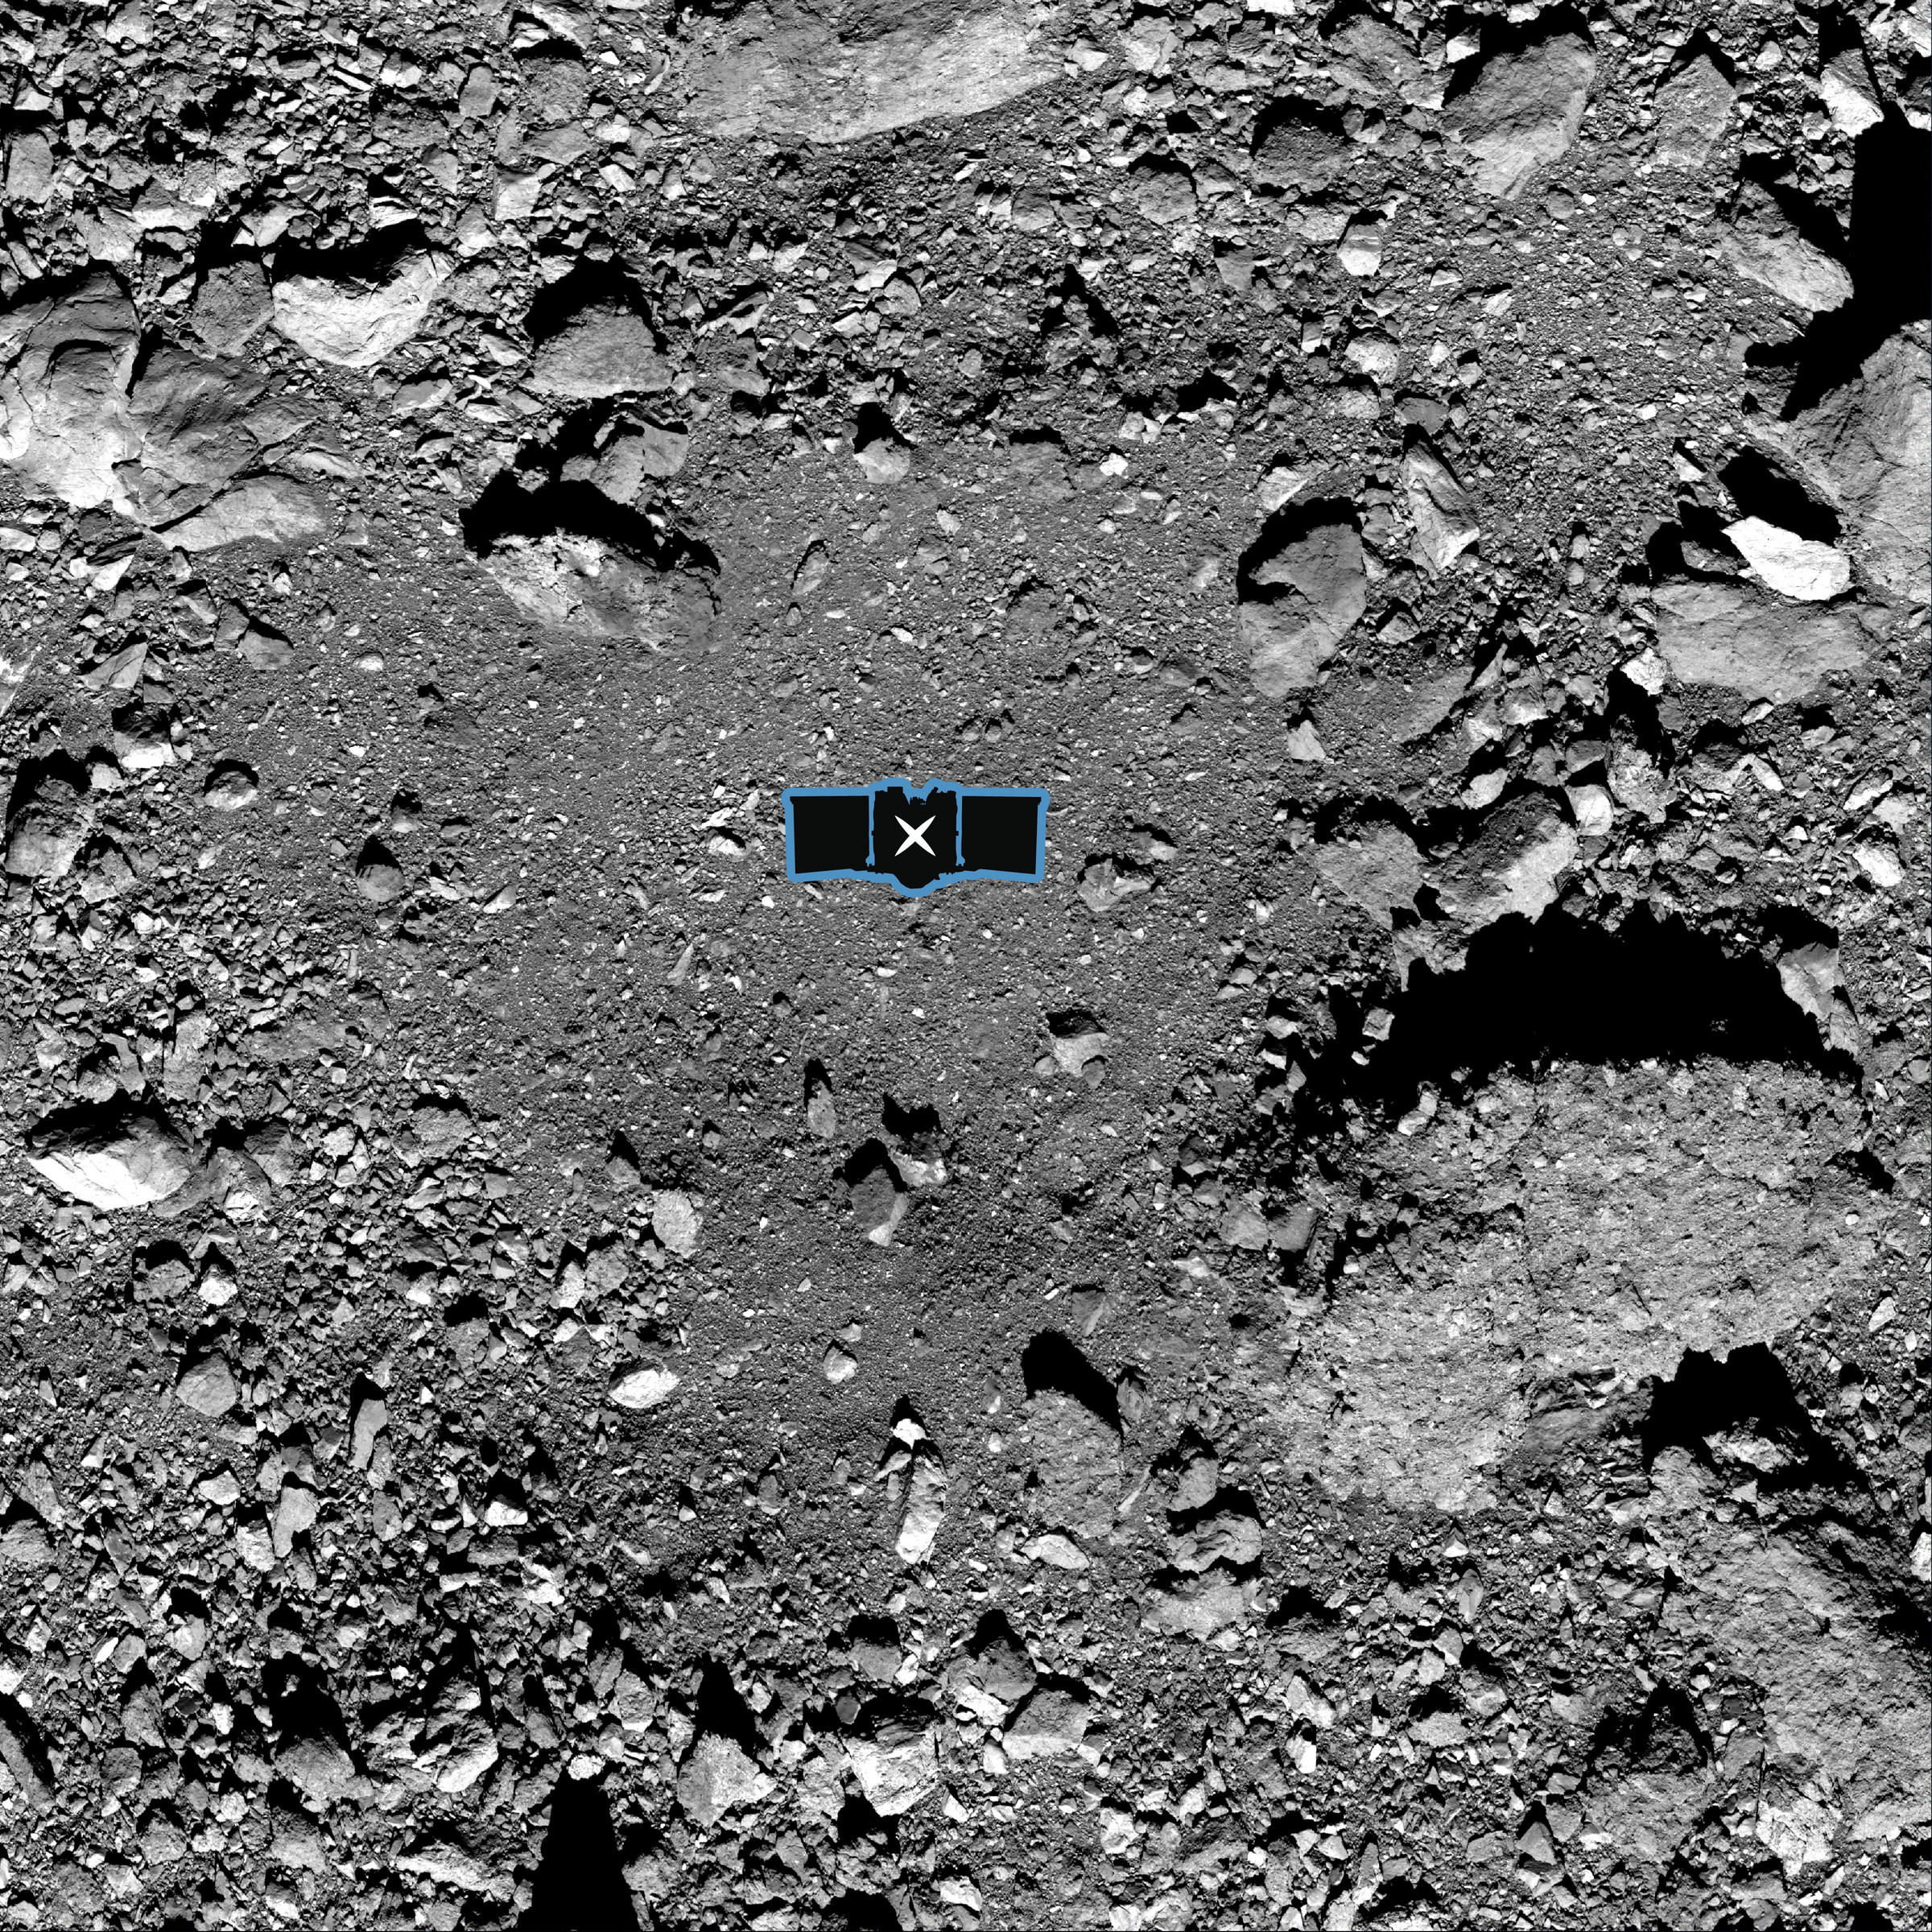 An image of the Nightingale crater, with a graphic of the OSIRIS-REx spacecraft’s size for scale